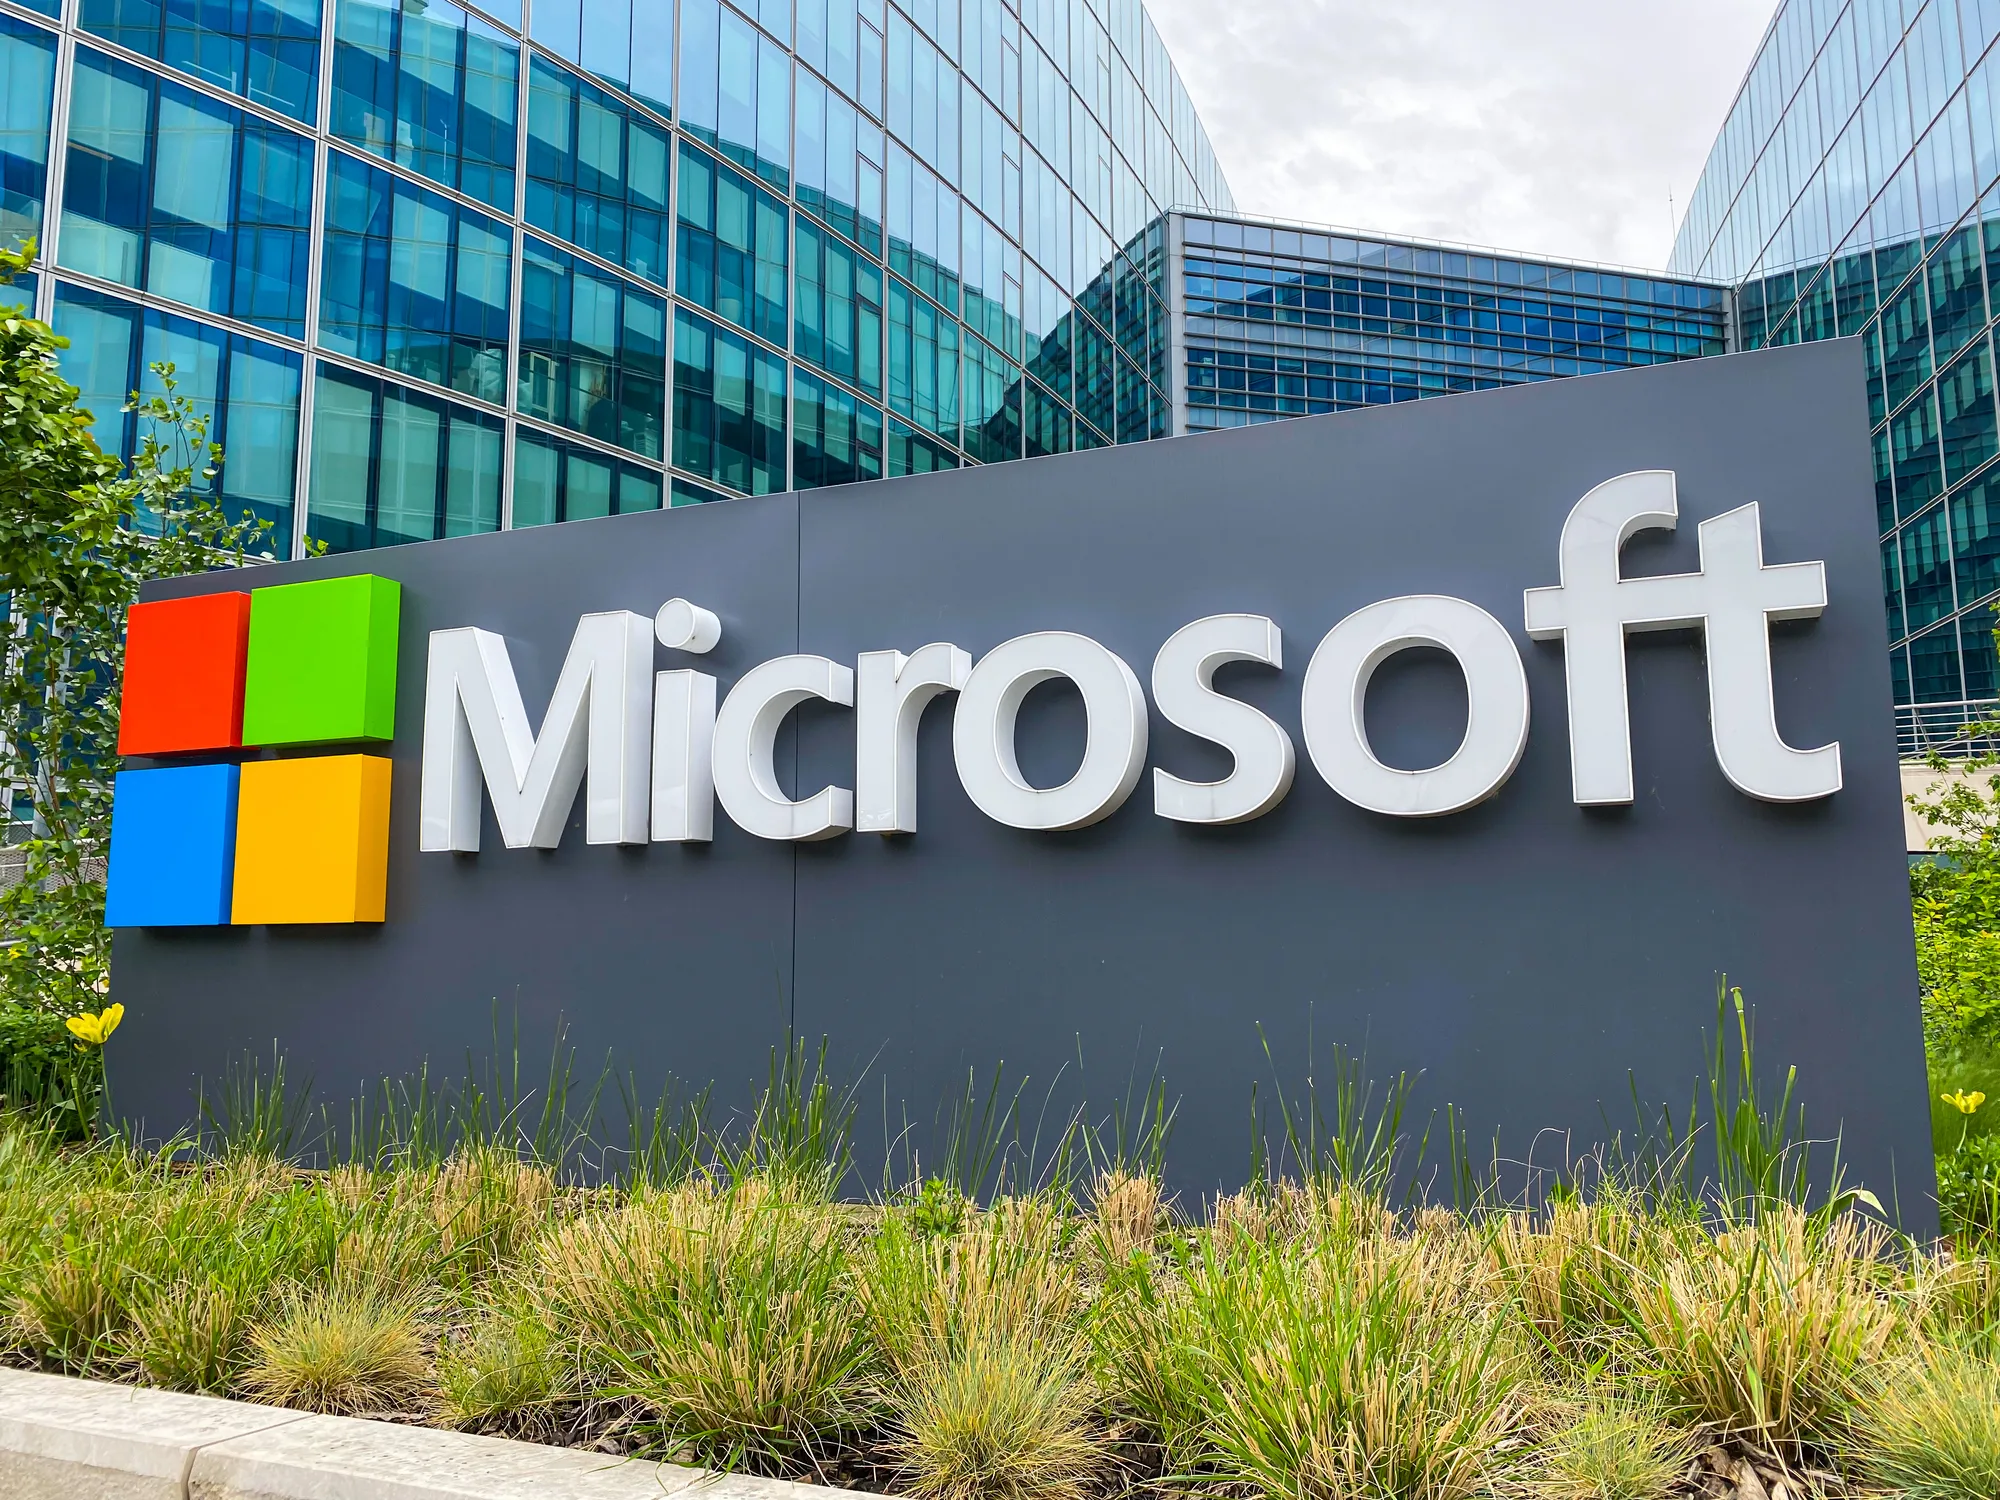 Microsoft’s revenue soars to $62 billion as investment in AI pays off.